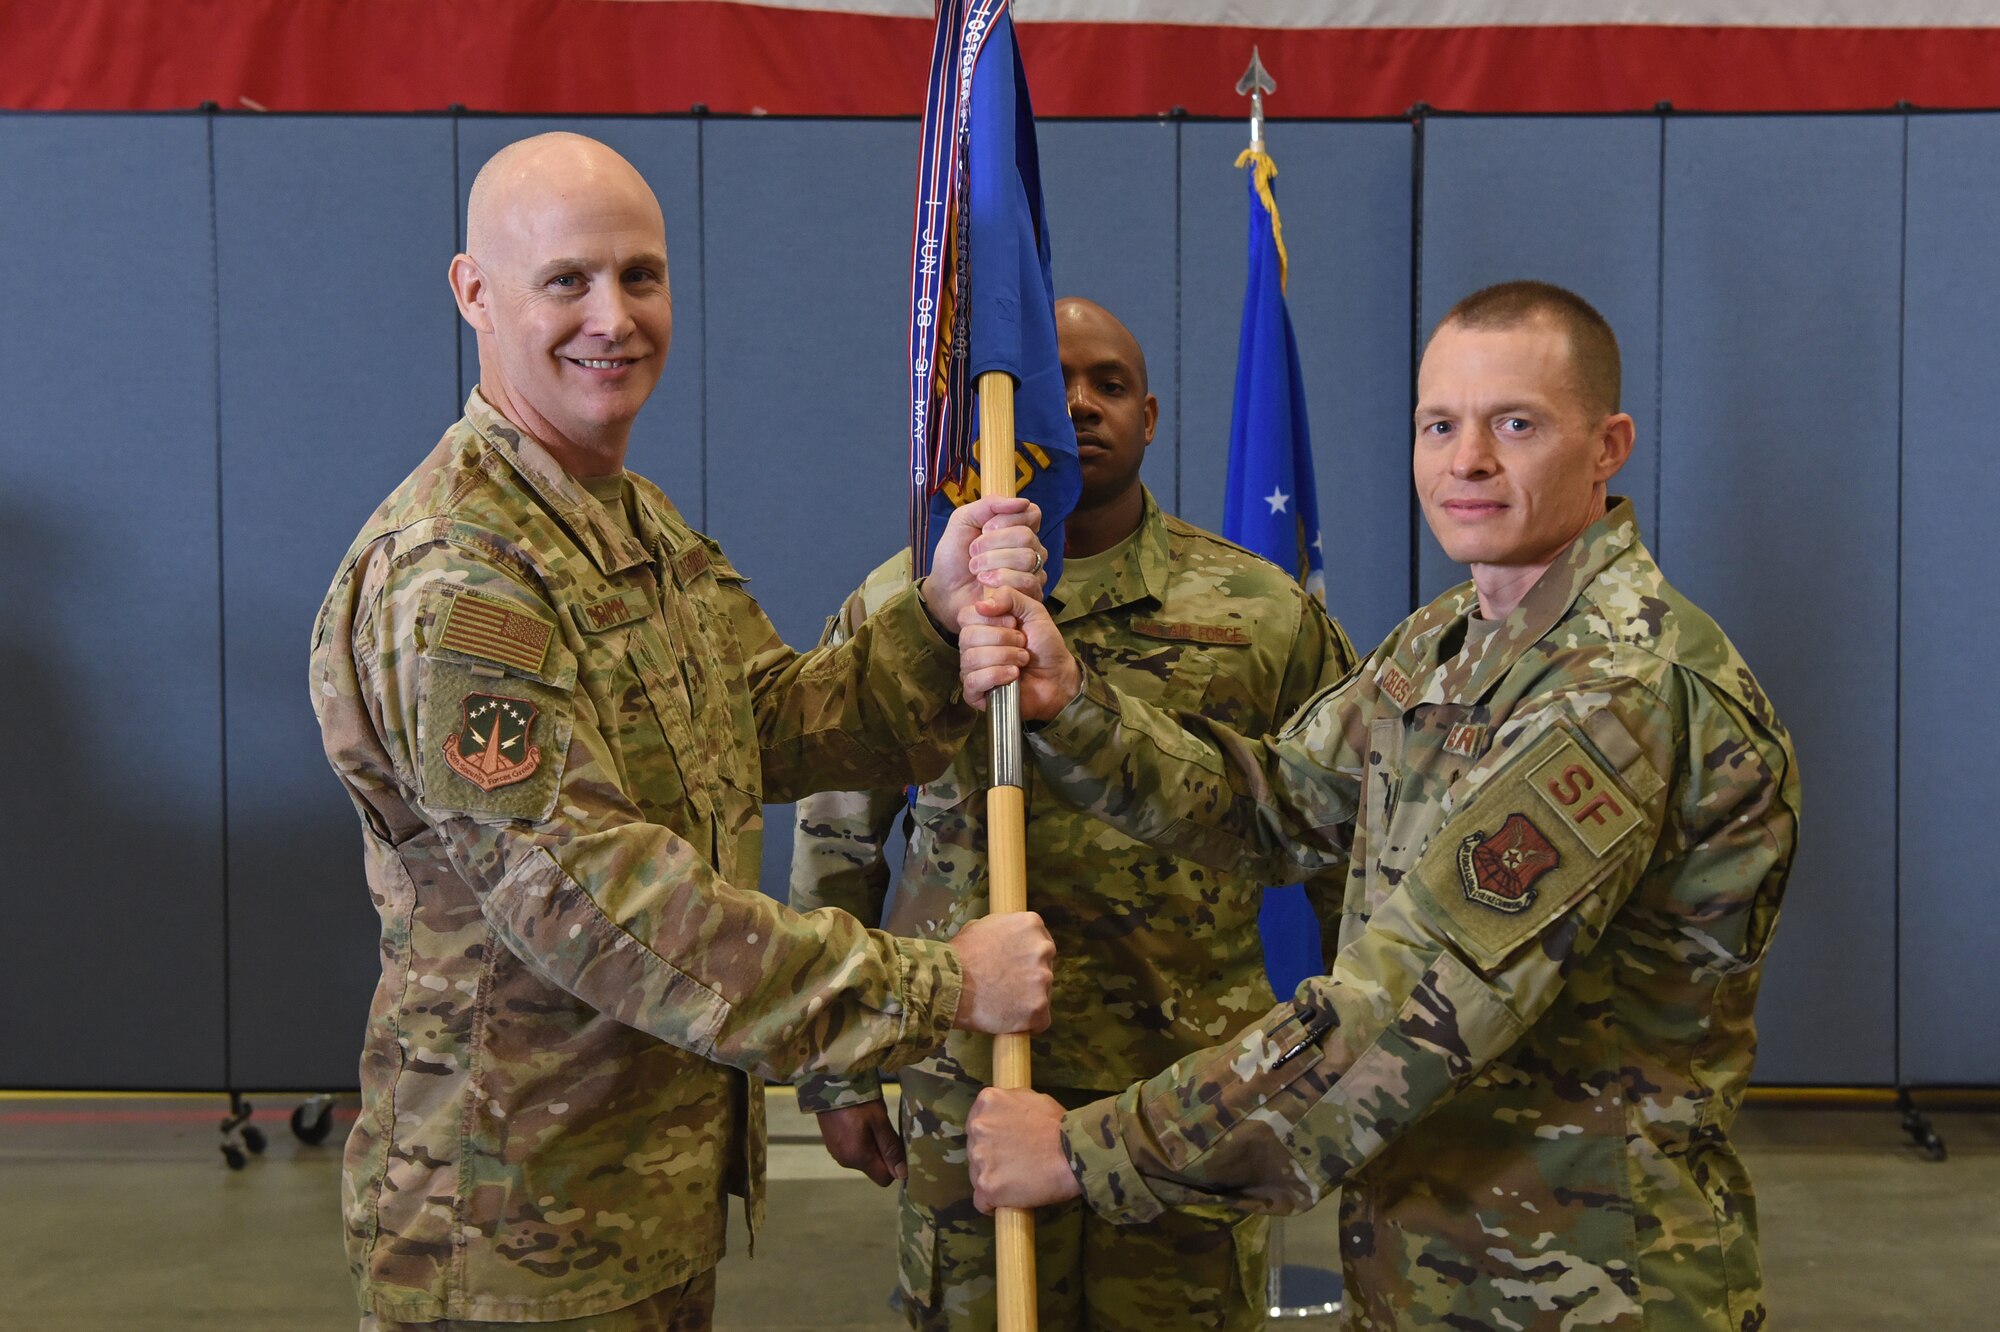 Colonel John Grimm, 90th Security Forces Group commander, passes the guidon to Lt. Col. David Celeste, 90th Missile Security Forces Squadron incoming commander, during the 90ths MSFS change of command ceremony June 26, 2019, on F.E. Warren Air Force Base, Wyo. The ceremony signified the transition of command from Lt. Col. Anthony McCarty to Celeste. (U.S. Air Force photo by Senior Airman Nicole Reed)